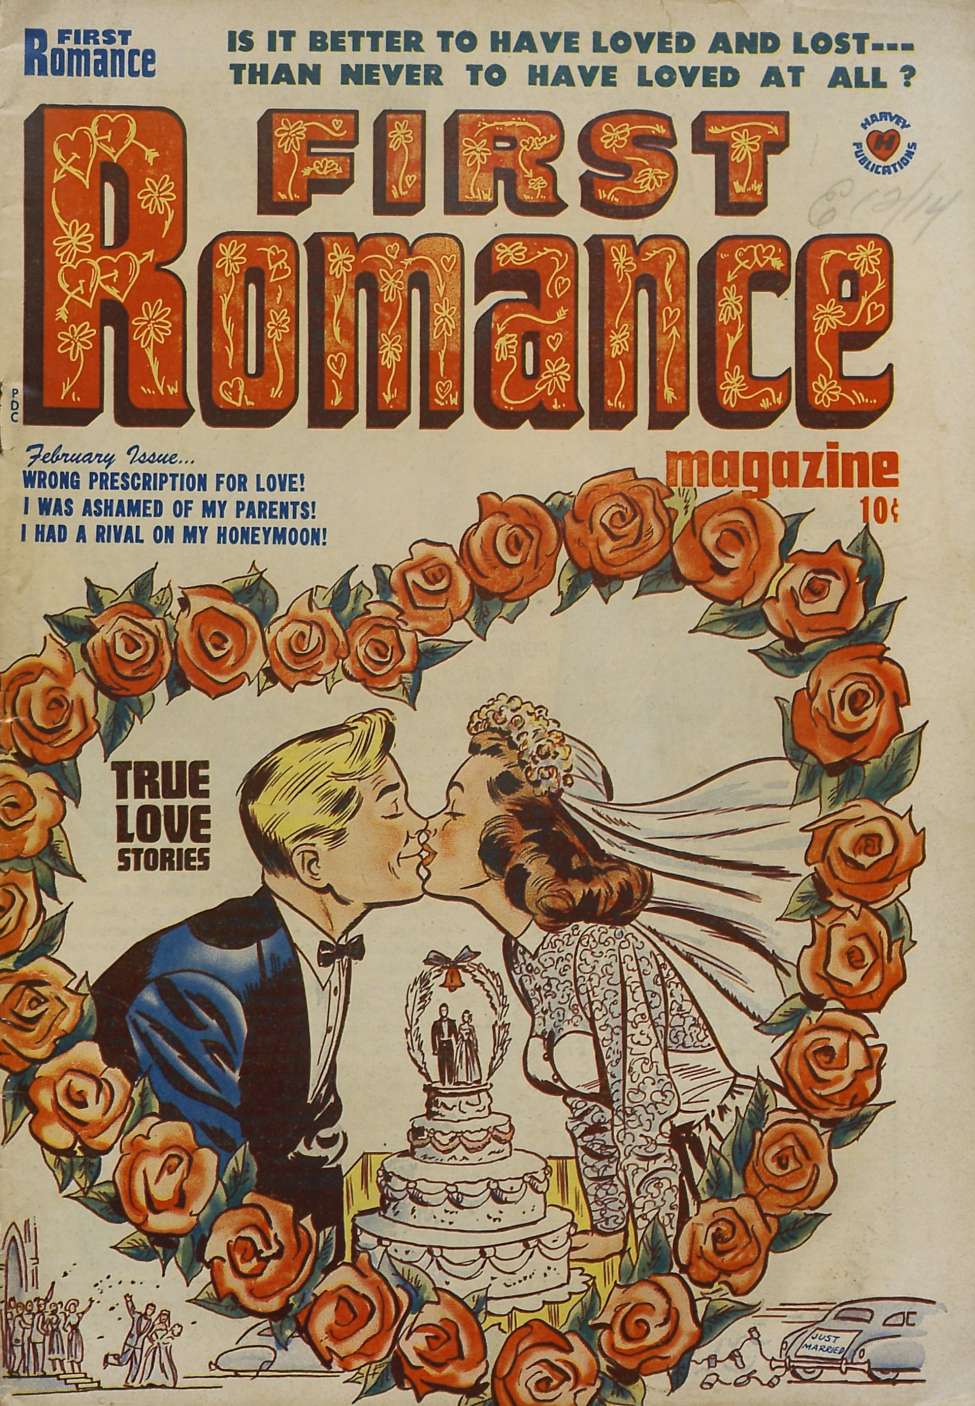 Book Cover For First Romance Magazine 4